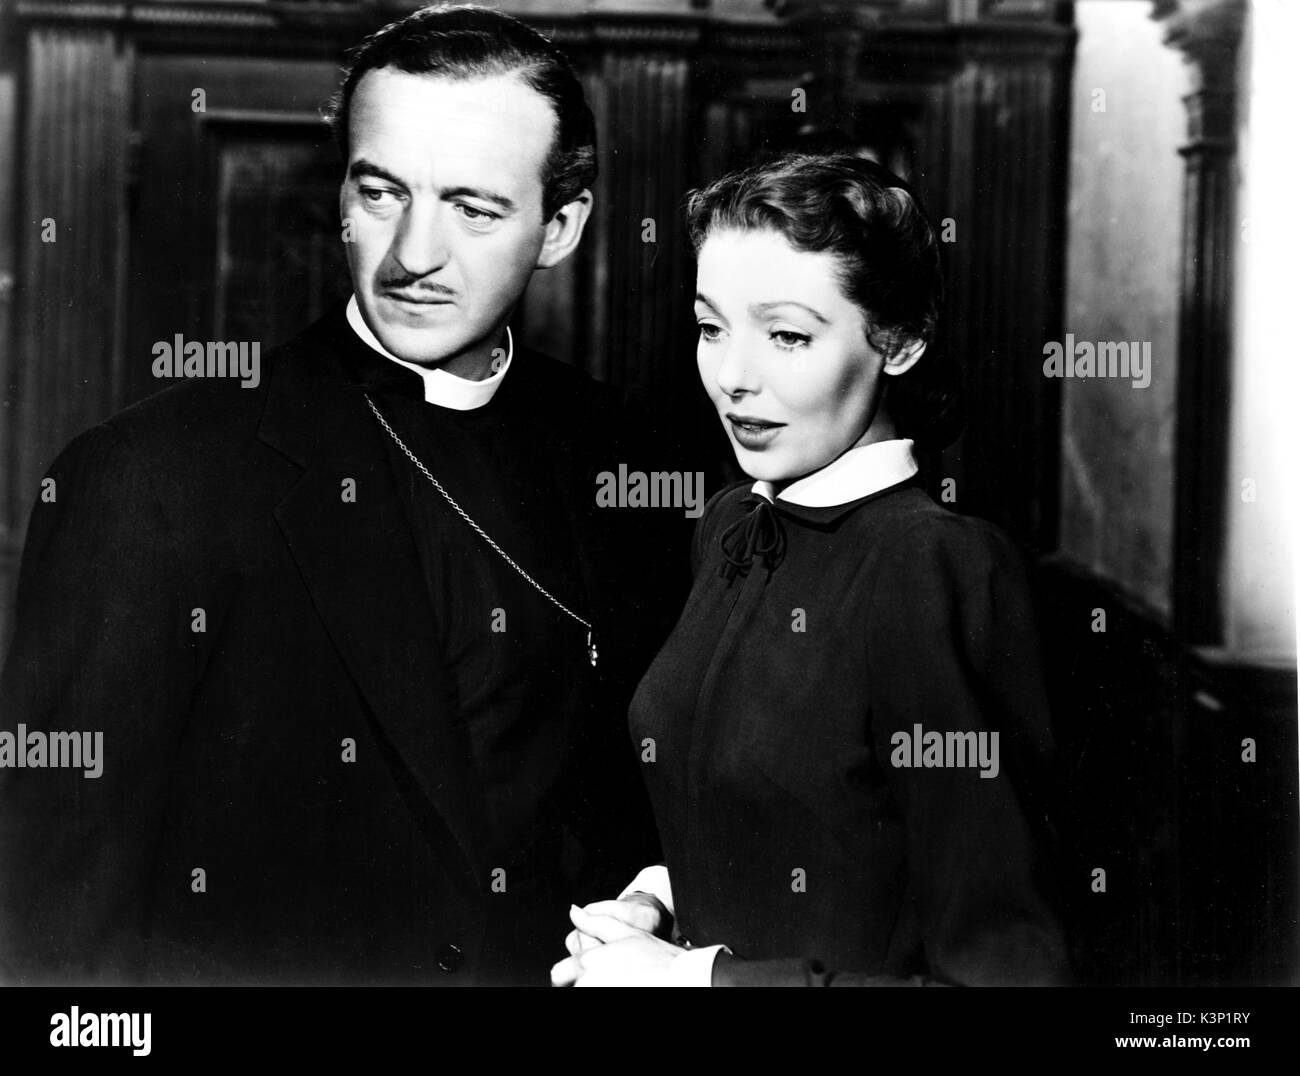 THE BISHOP'S WIFE [US 1947] DAVID NIVEN, LORETTA YOUNG     Date: 1947 Stock Photo